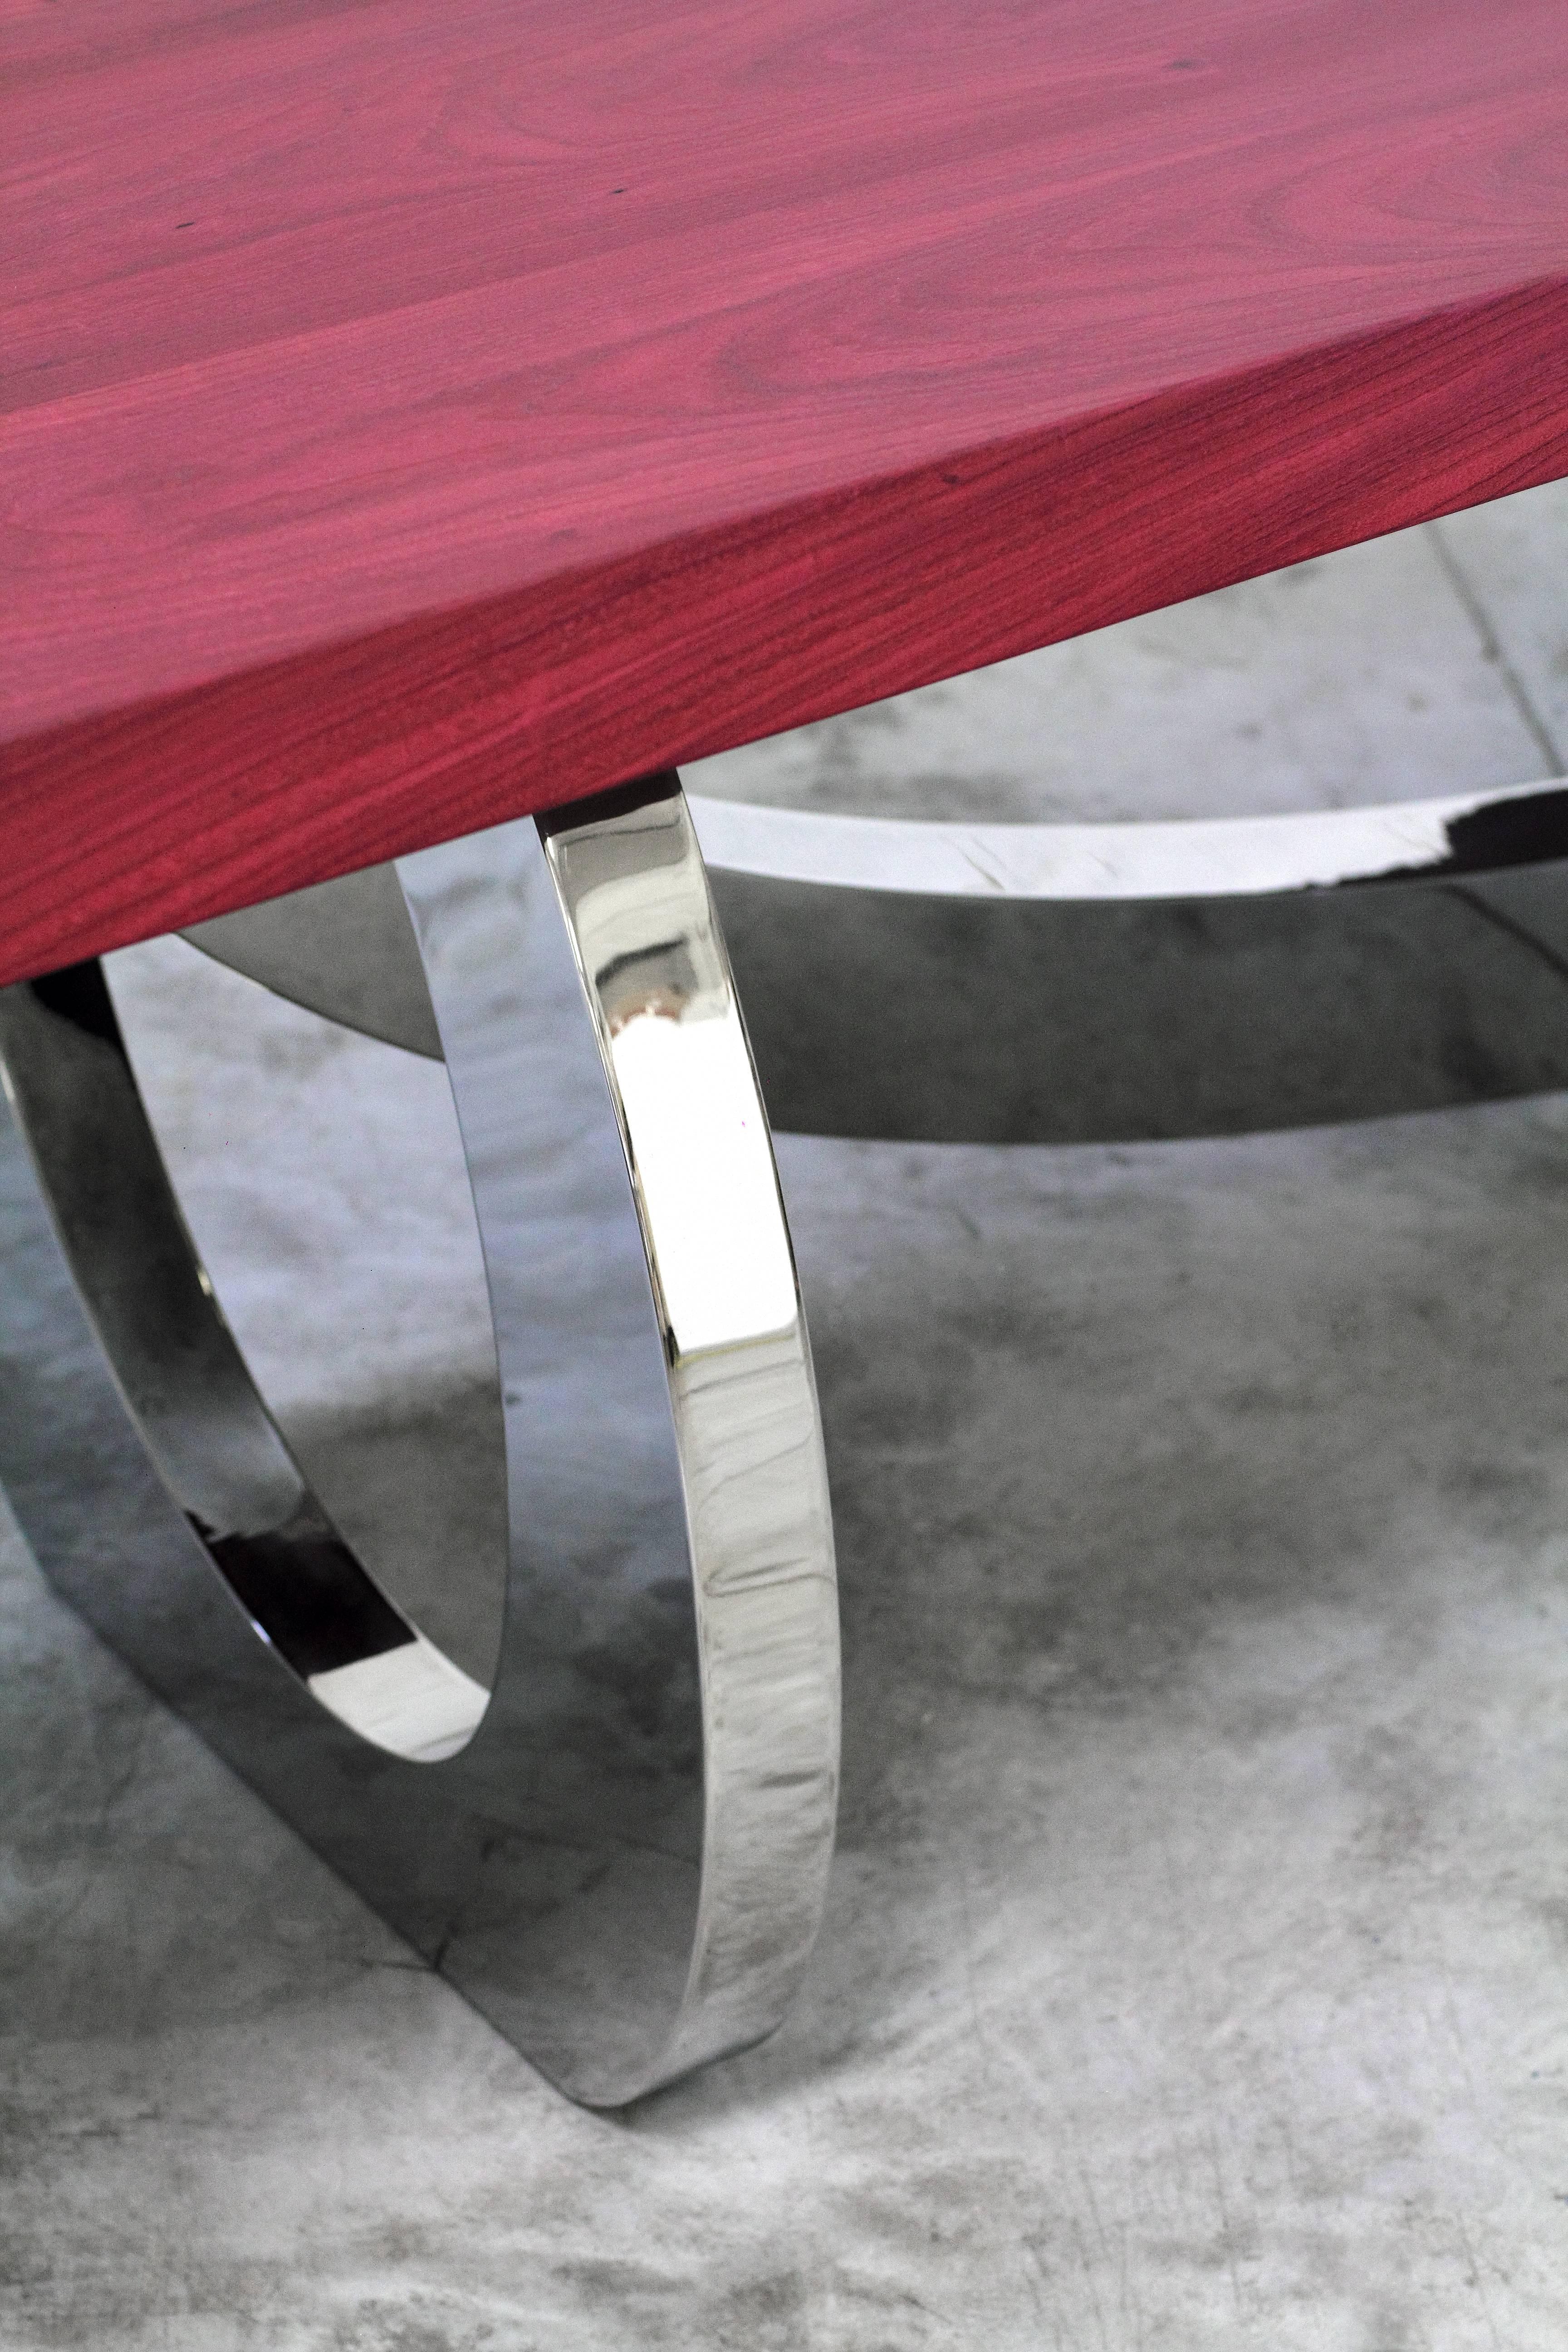 Modern Dining Table Spiegel Stahl Ringe Basis Solid Wood Magenta Top Made in Italy im Angebot 1